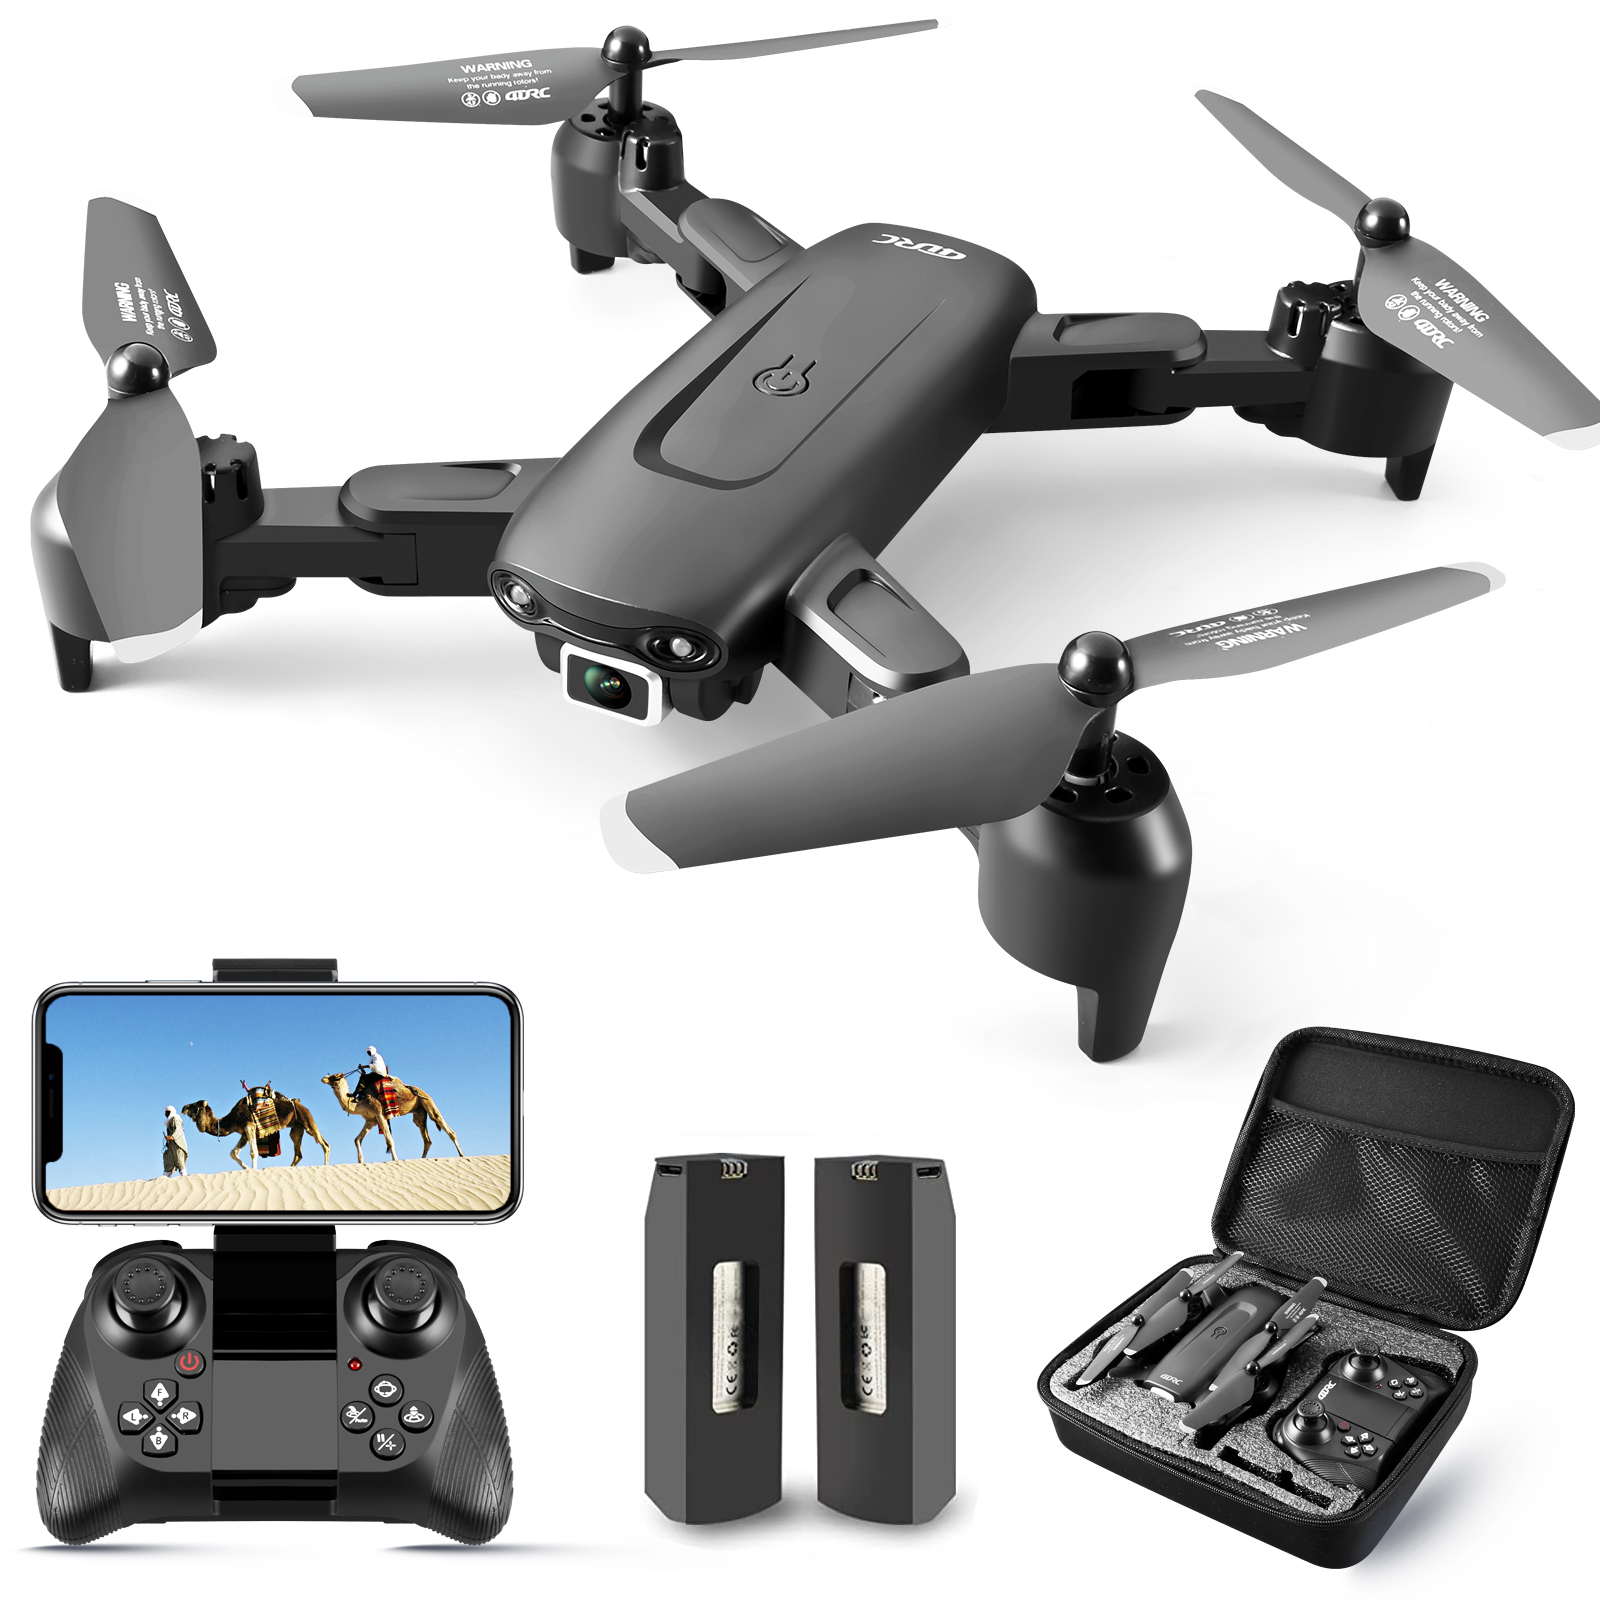 720P FPV Camera Quadcopter for Kids & Adults